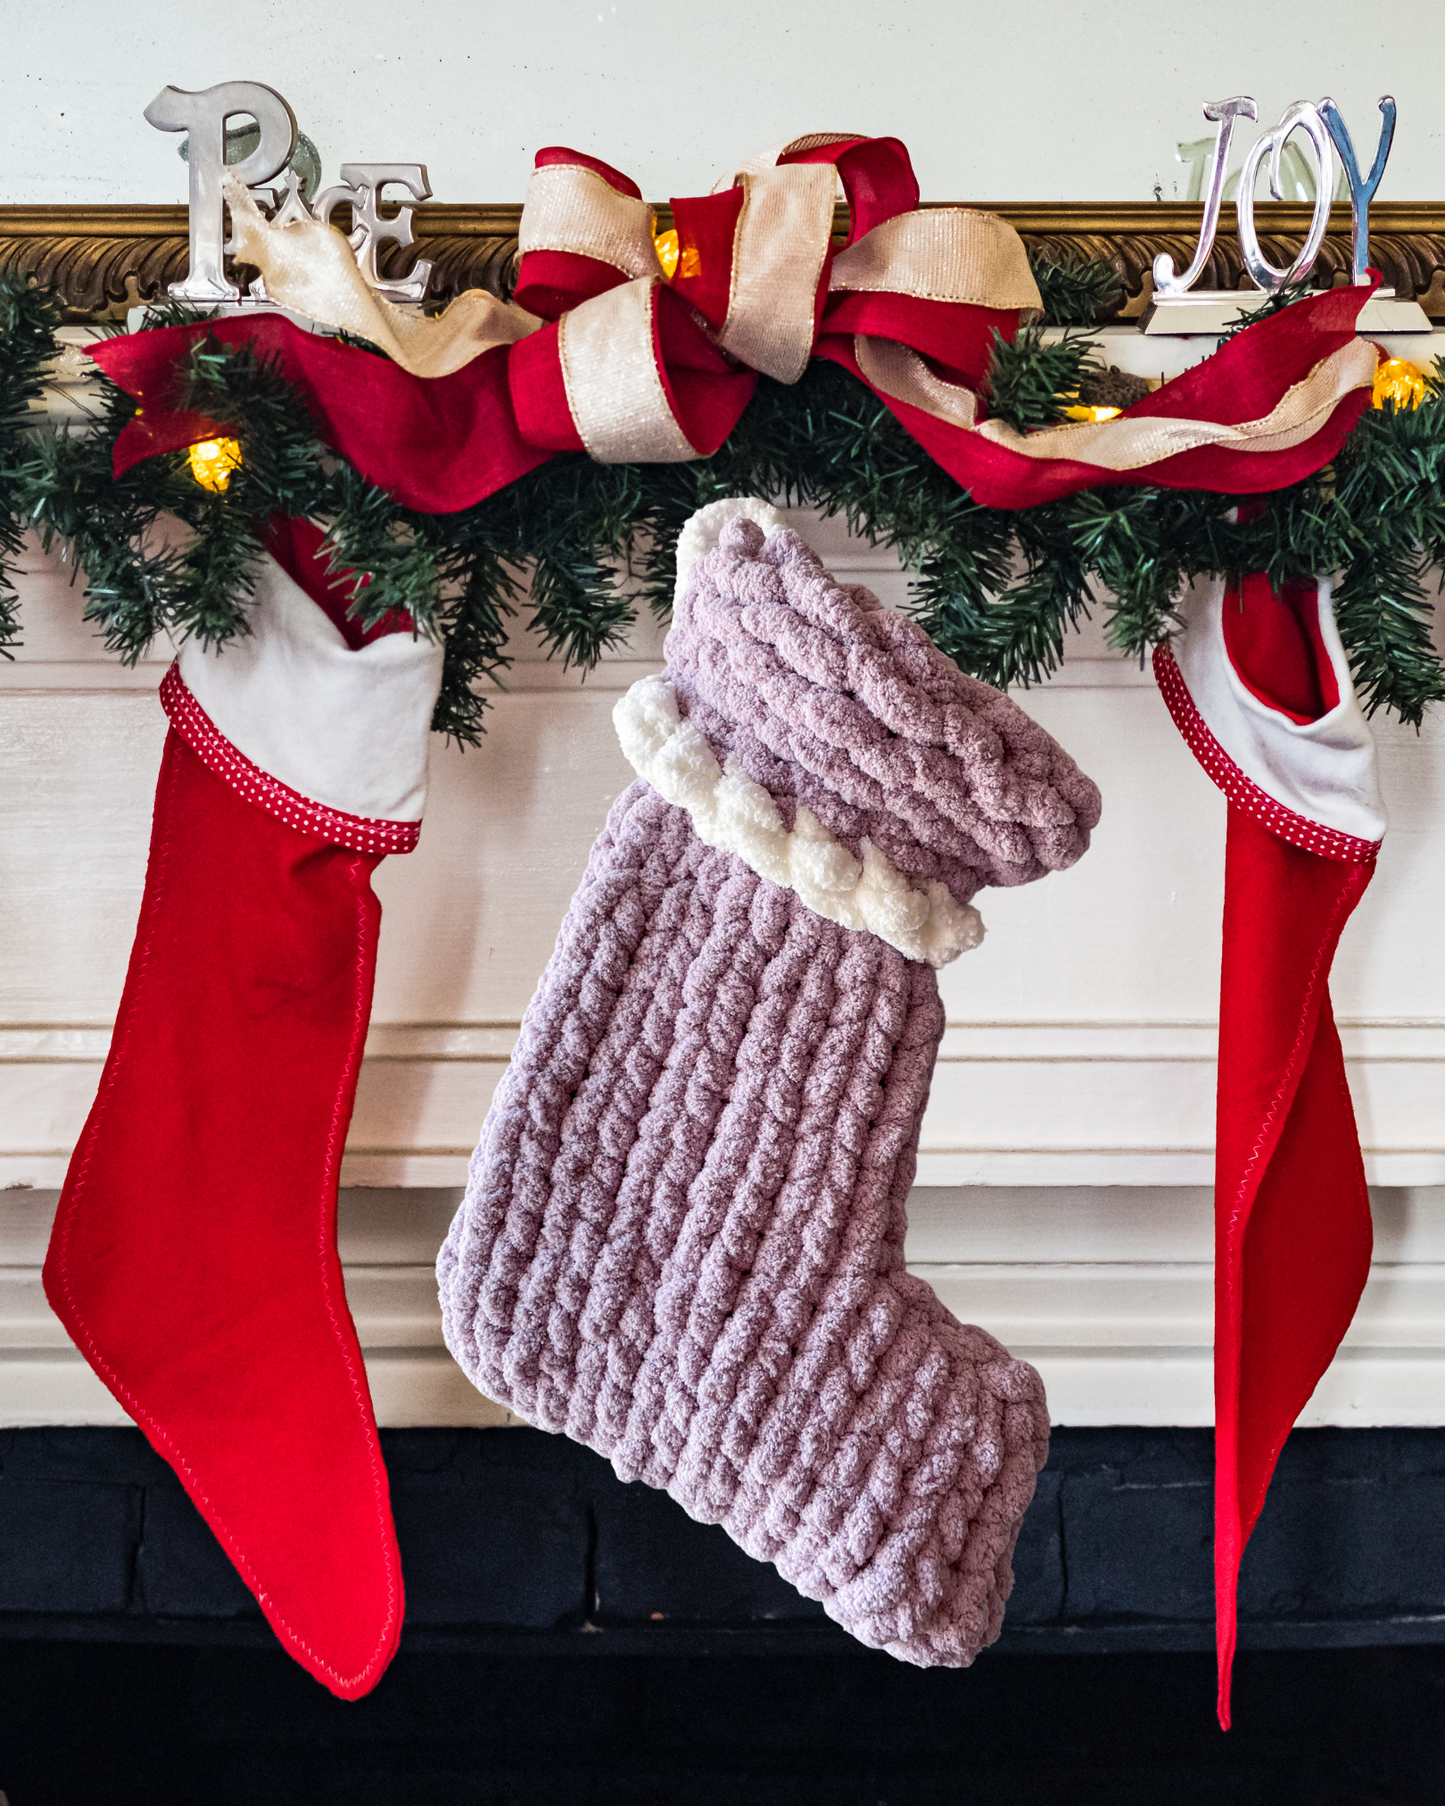 Christmas Hanknit Yarn Stocking - Lavender with White 17”